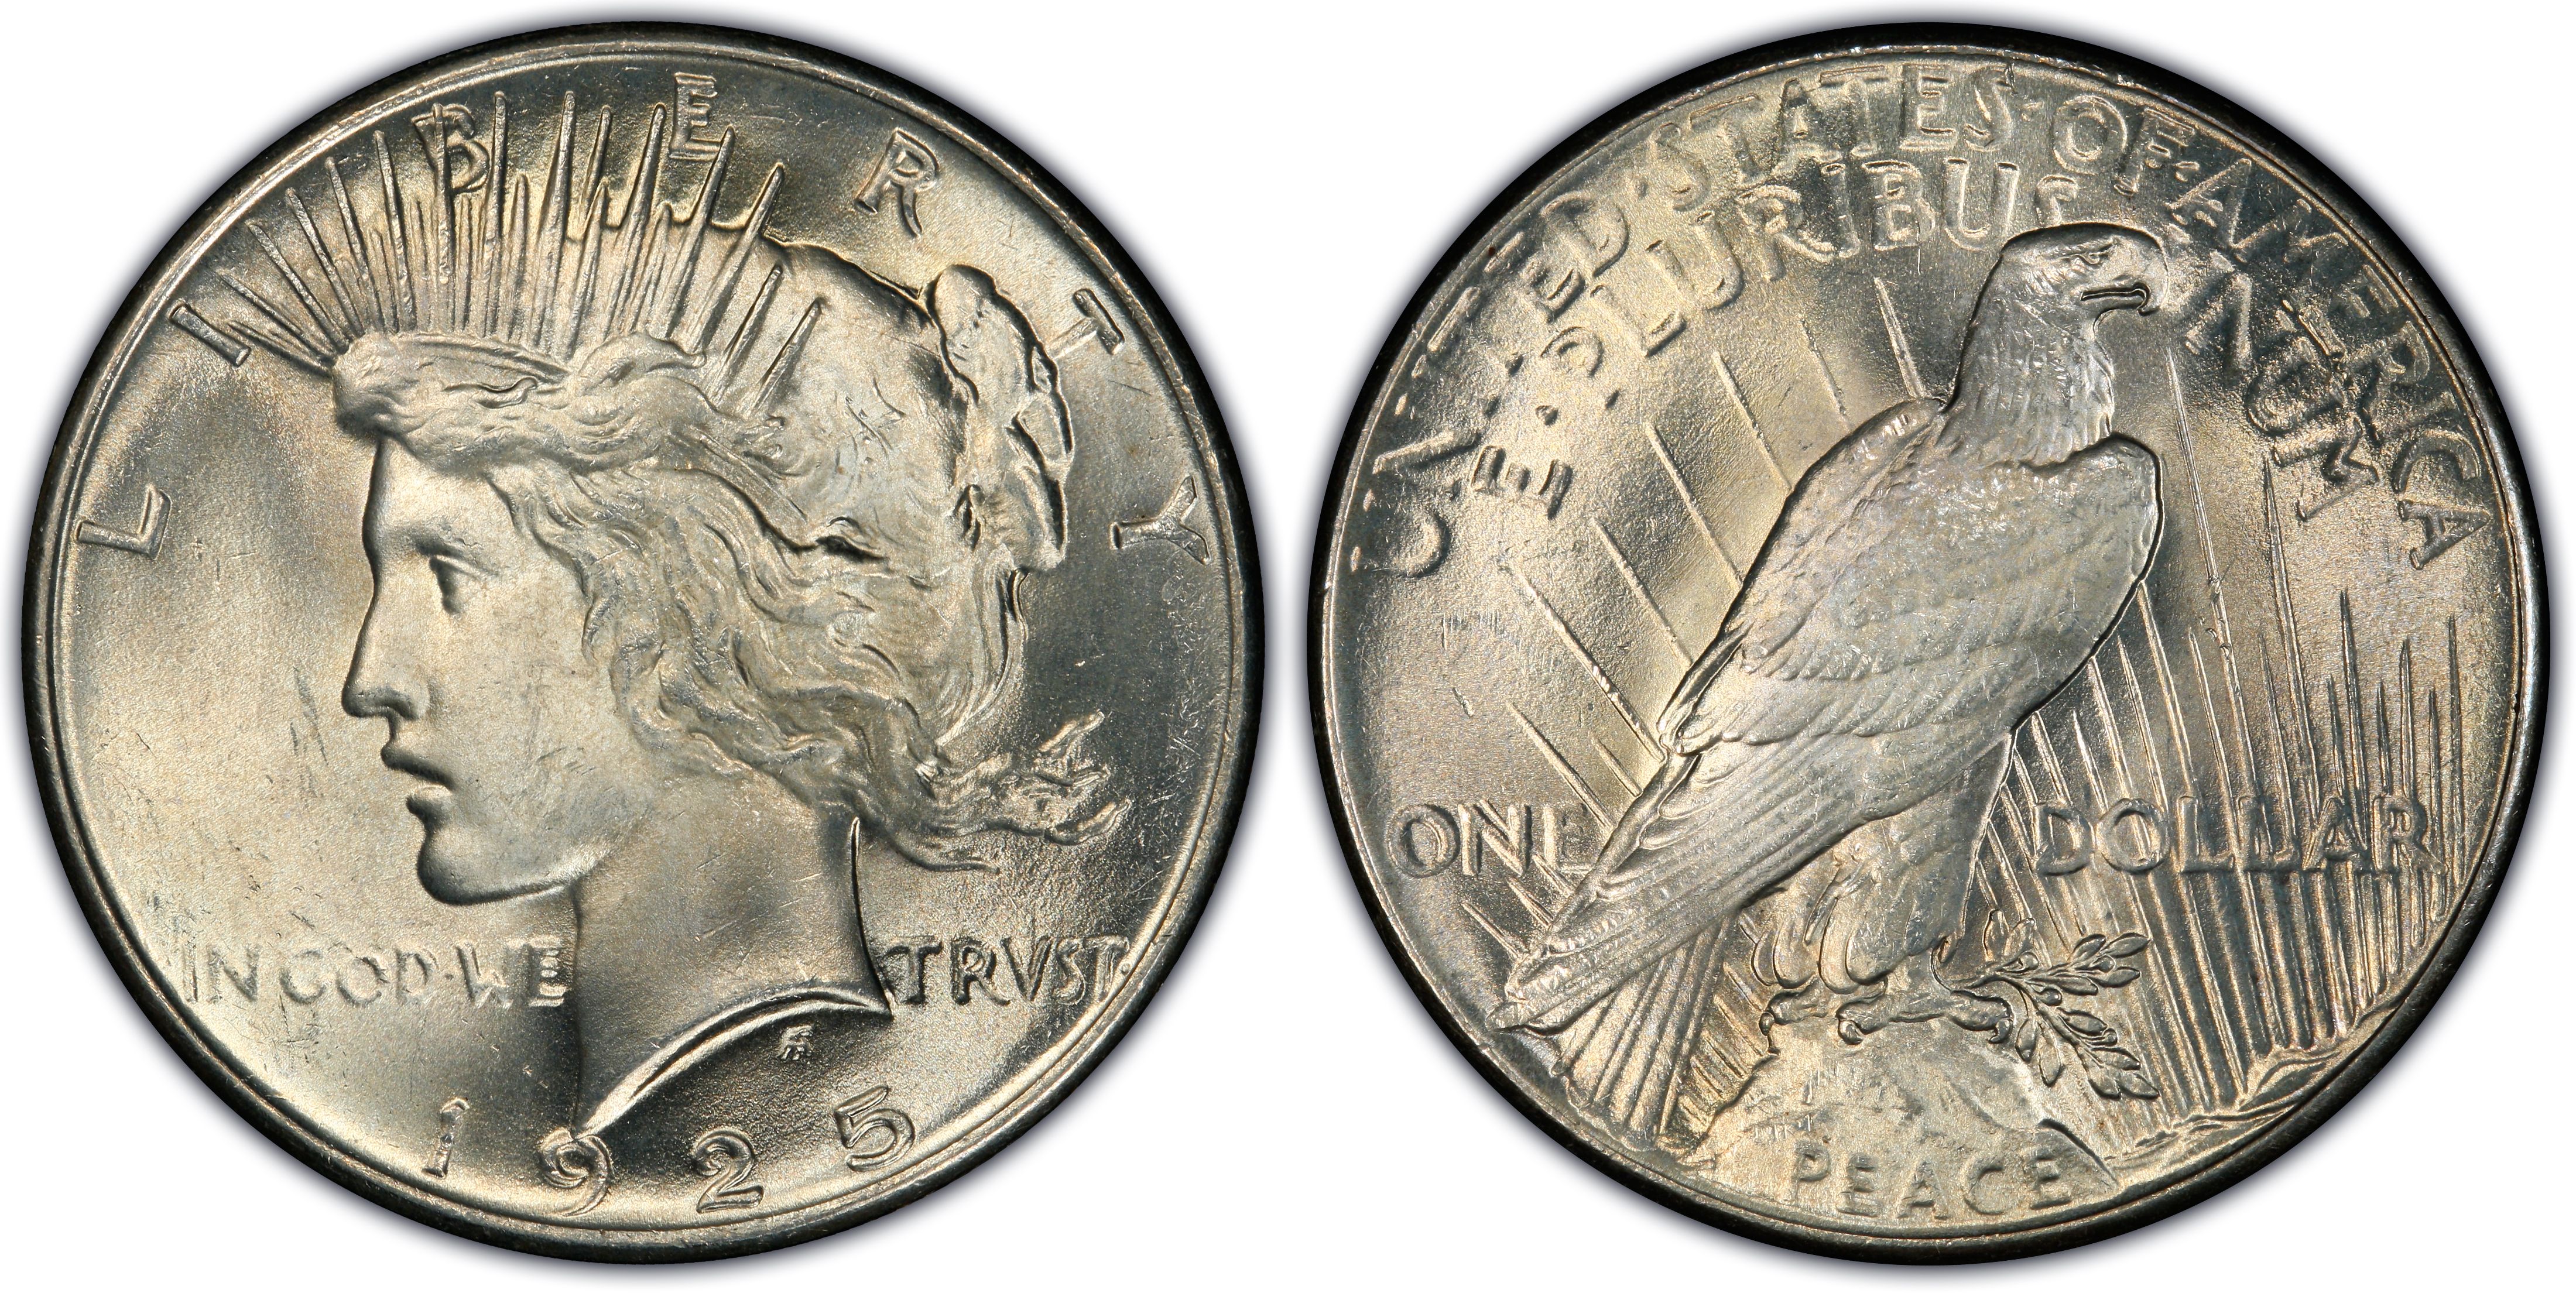 1923 Peace Dollar Silver Graded MS-65 "Bright and Lustrous",a beauty.......